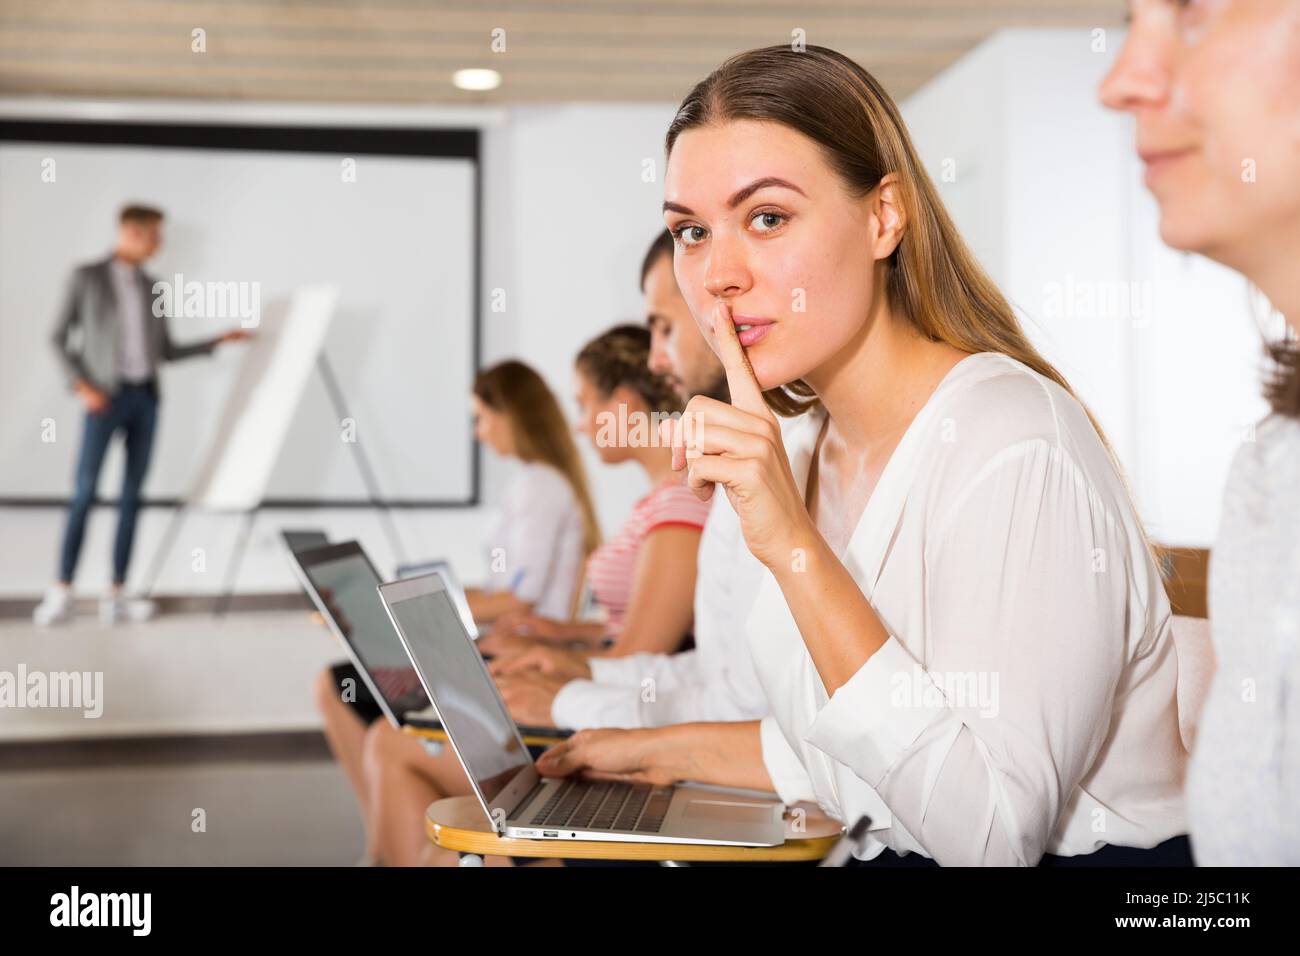 Woman showing silence sign Stock Photo